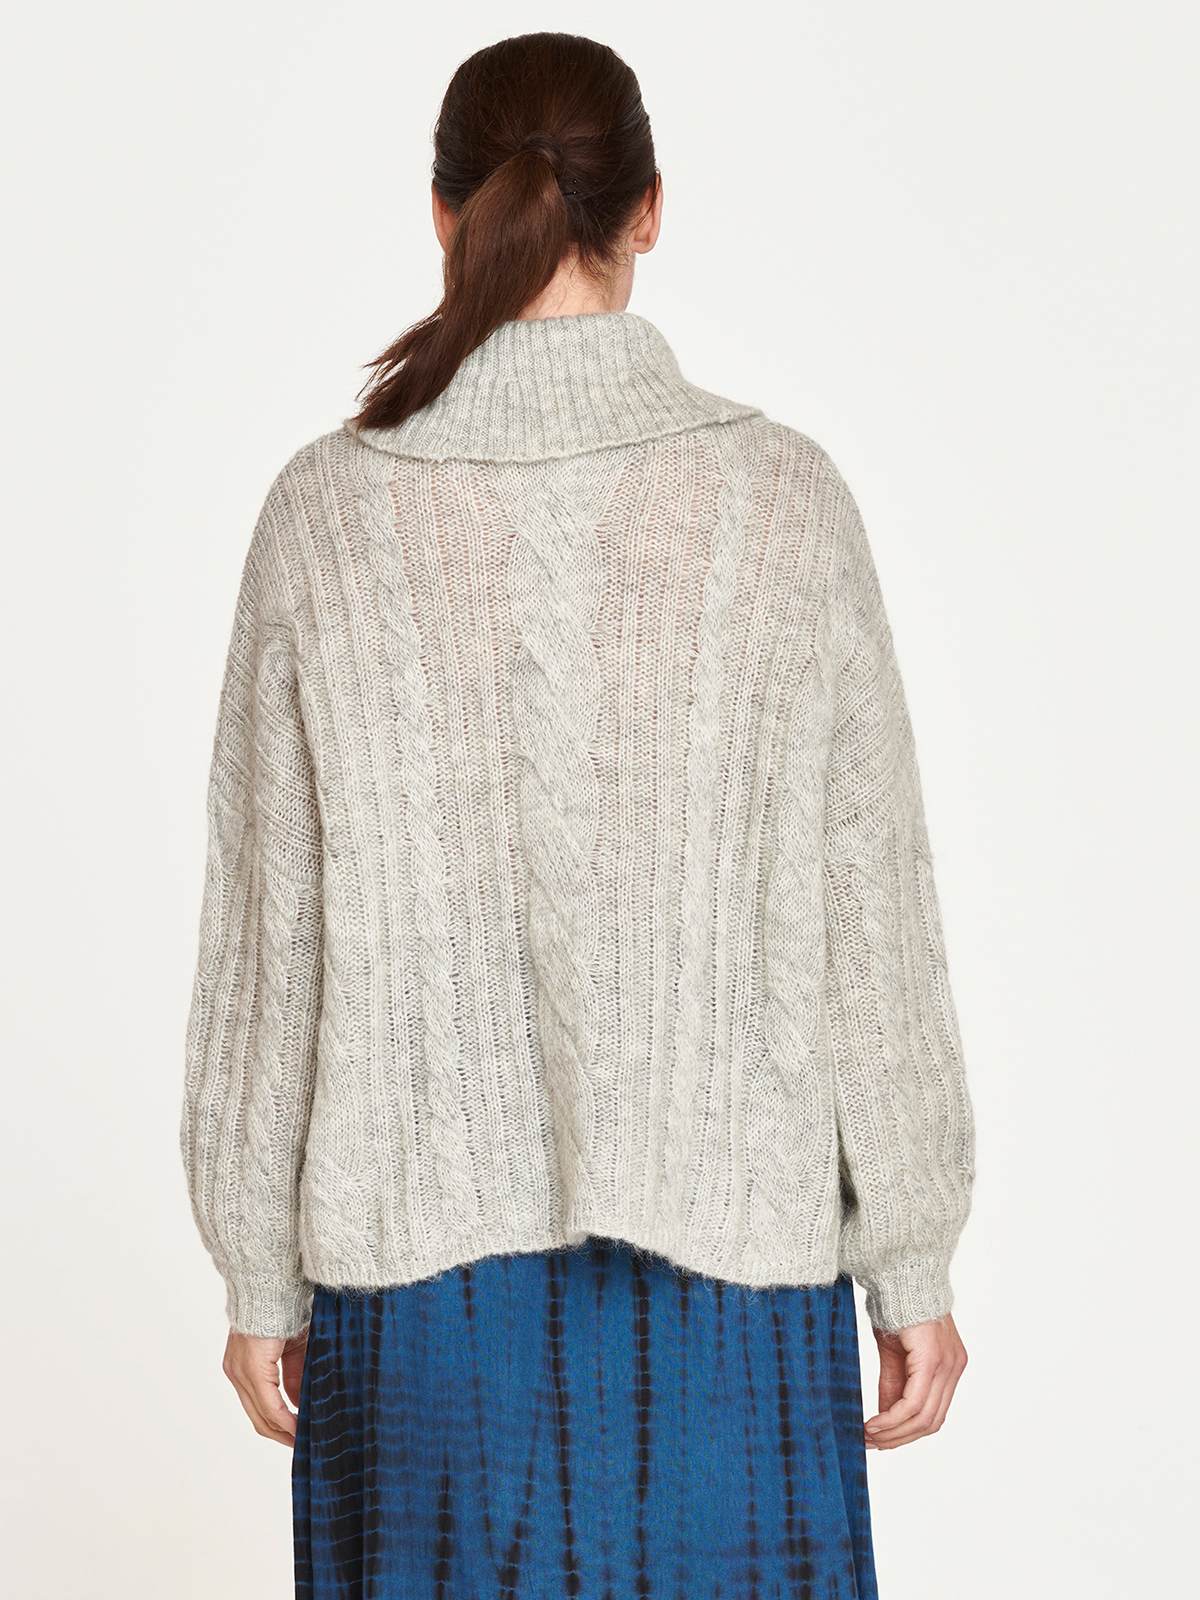 curate, thought apparel, ethically made and sustainable womens luxury apparel, lailia wool cable knit sweater in moonlight grey, women&#39;s knitwear and sweater